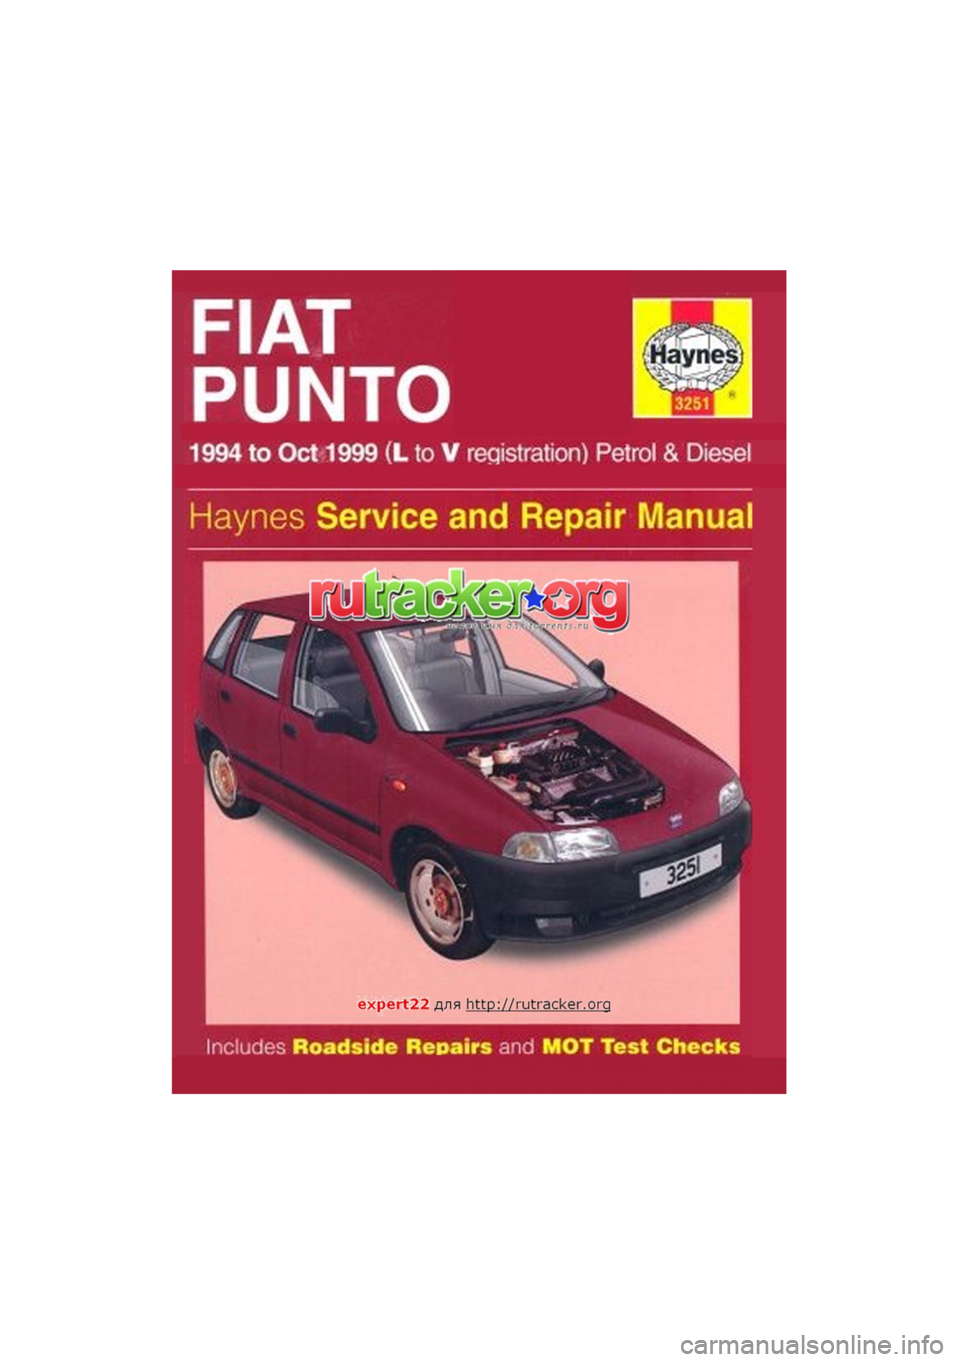 FIAT PUNTO 1994 176 / 1.G Workshop Manual 
FIAT 
PUNTO 
1994 to Oct 1999 (L to V registration) Petrol & Diesel 
Haynes Service and Repair Manual 
expert22 fl/ia http://rutracker.org 
Includes Roadside Repairs and MOT Test Checks  